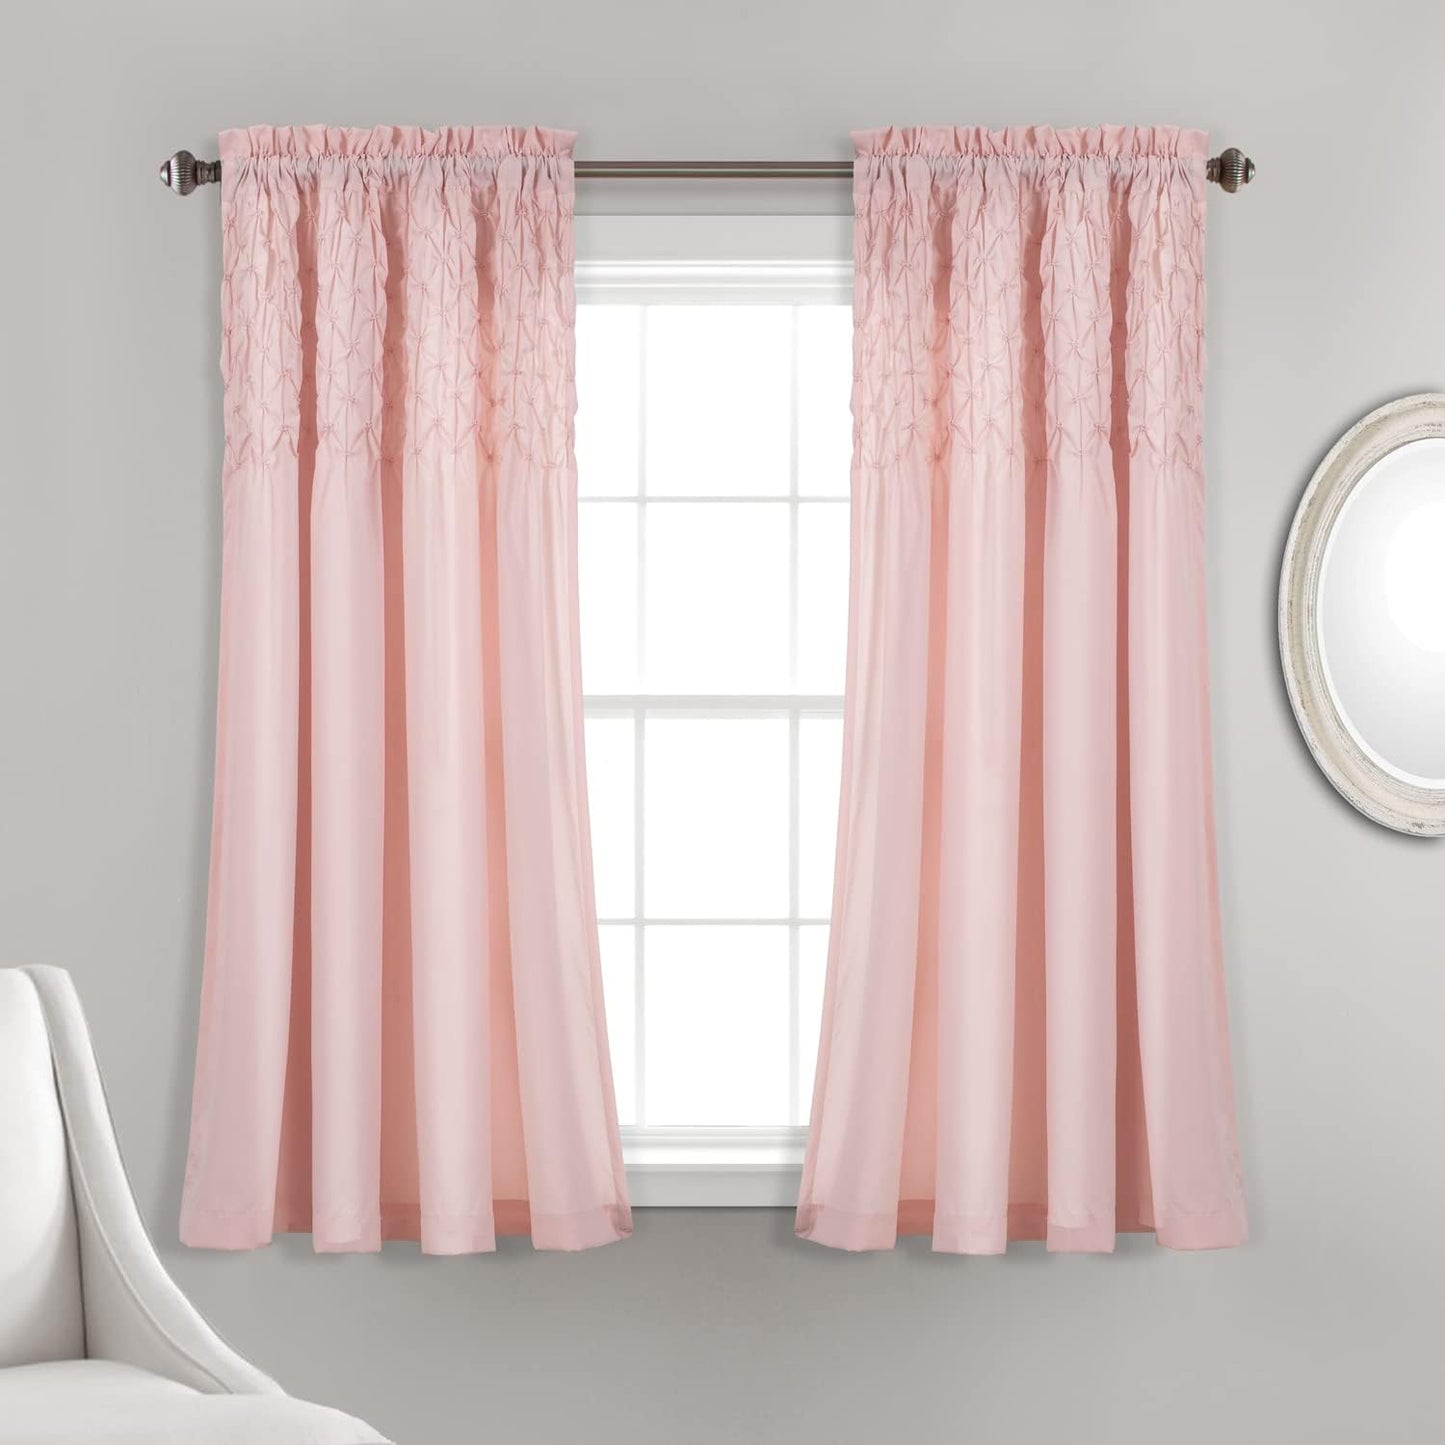 Lush Decor Bayview Curtains-Pintuck Textured Semi Sheer Window Panel Drapes Set for Living, Dining, Bedroom (Pair), 54" W X 84" L, White  Triangle Home Fashions Blush 54"W X 63"L 